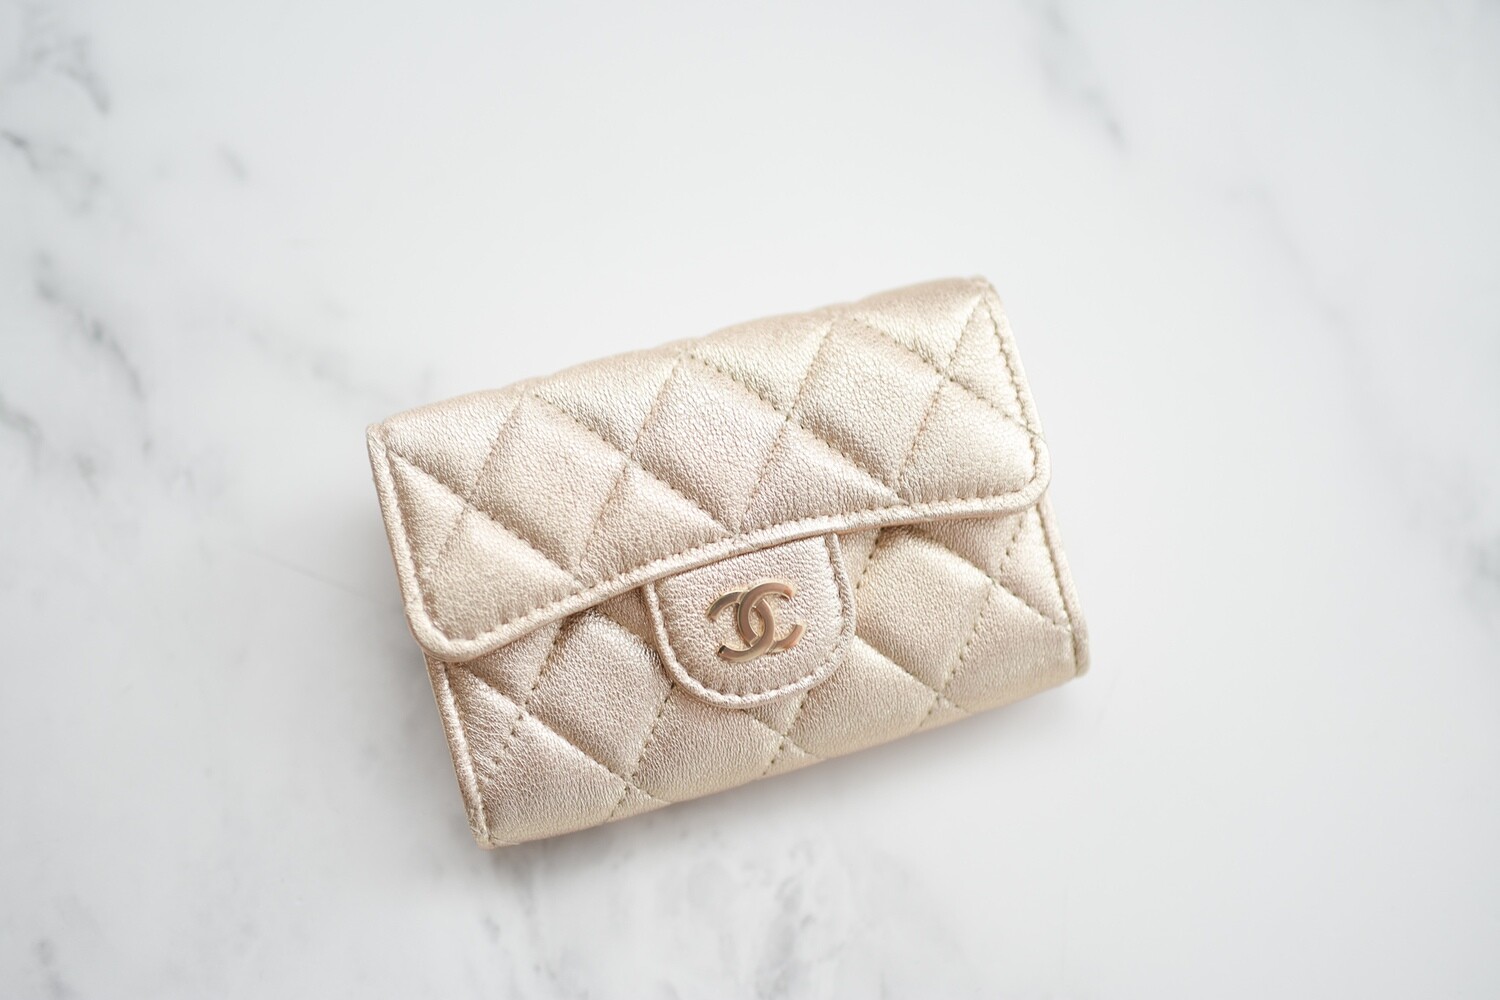 Chanel SLG Snap Card Holder, Gold Leather with Gold Hardware, New in Box  GA001 - Julia Rose Boston | Shop